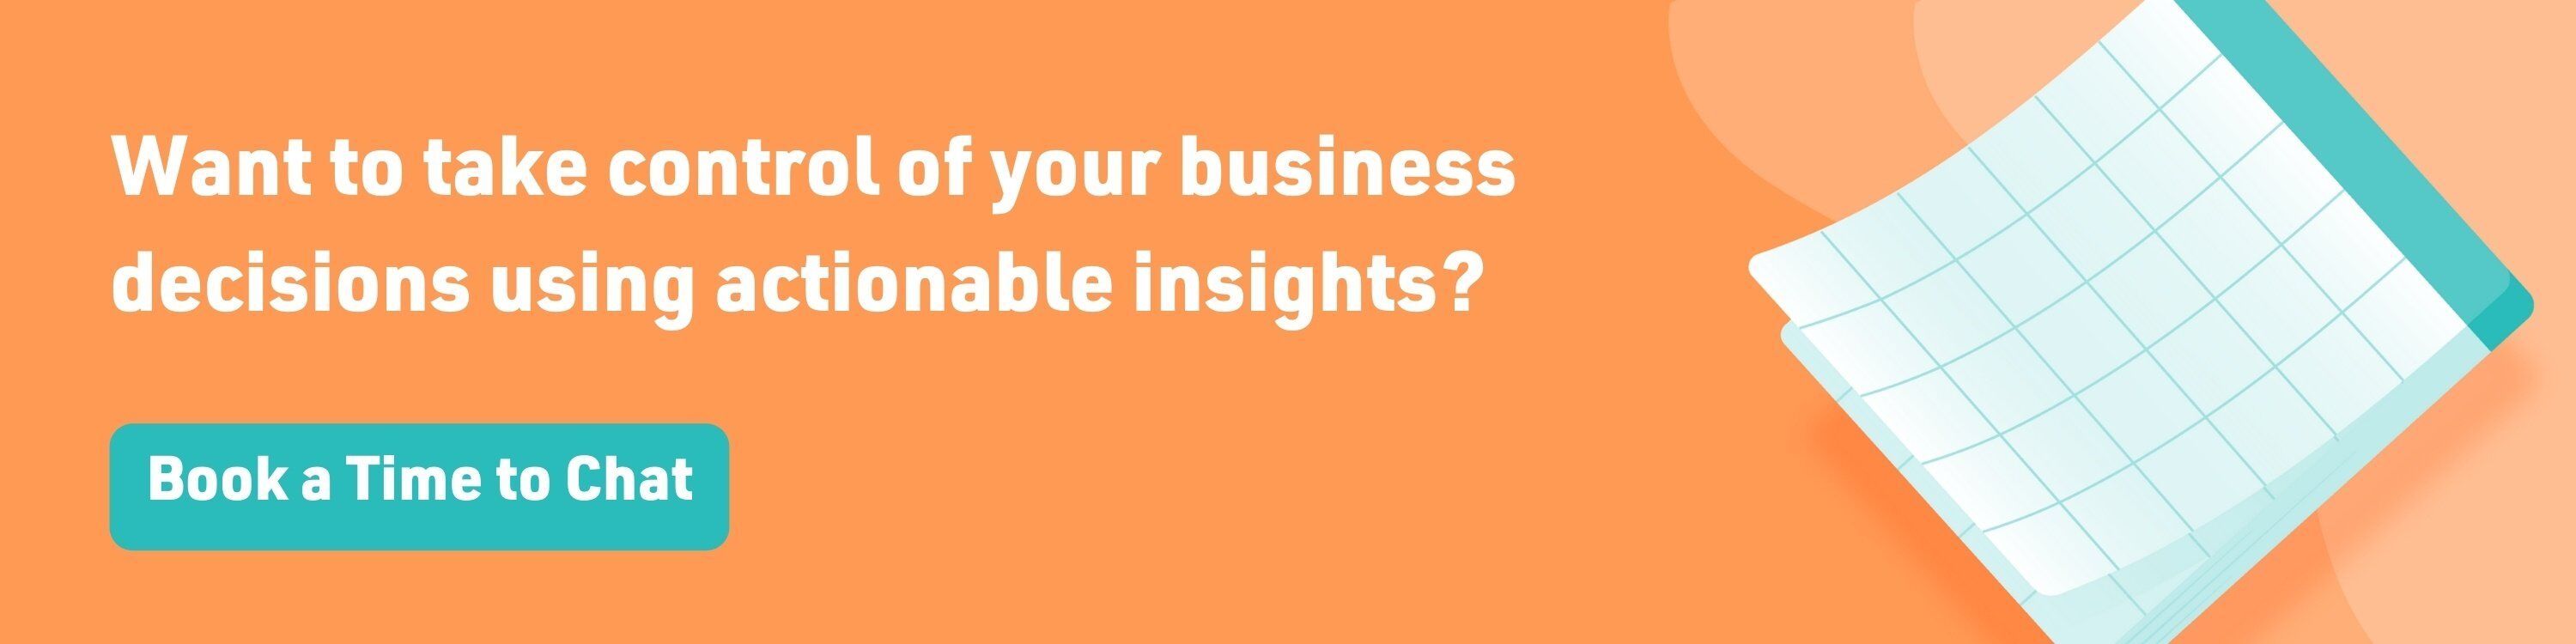 take control of business decisions using actionable insights